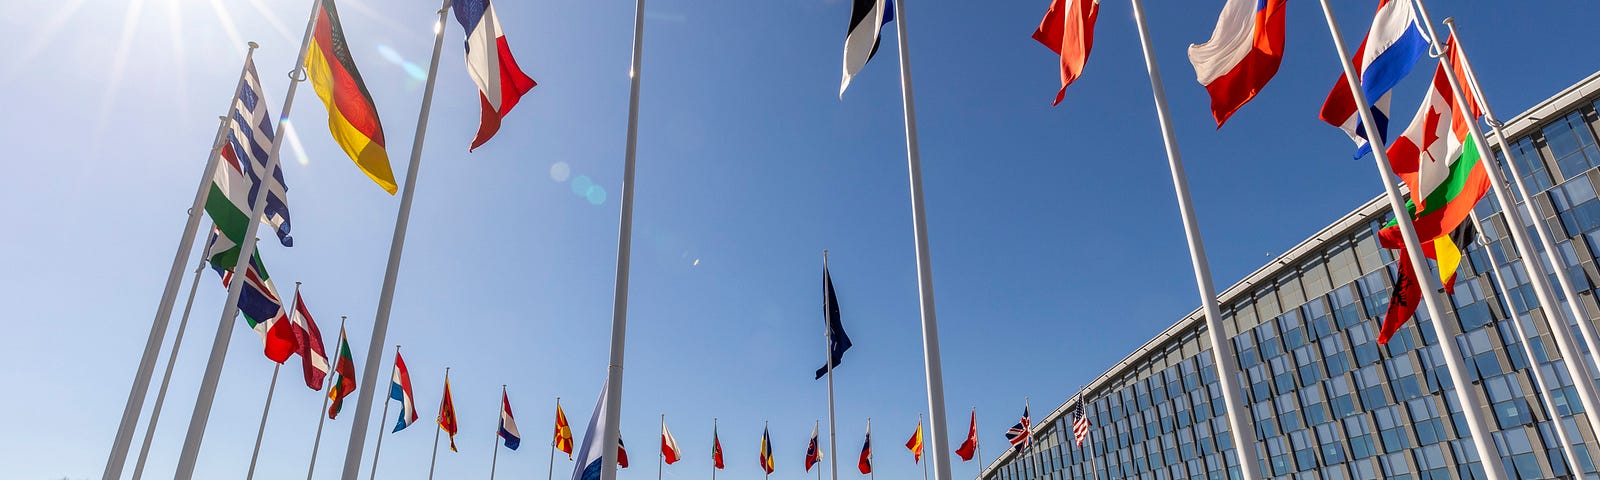 Finland’s flag is raised at NATO headquarters in Brussels, Belgium, April 4, 2023. Photo by EyePress News/Reuters